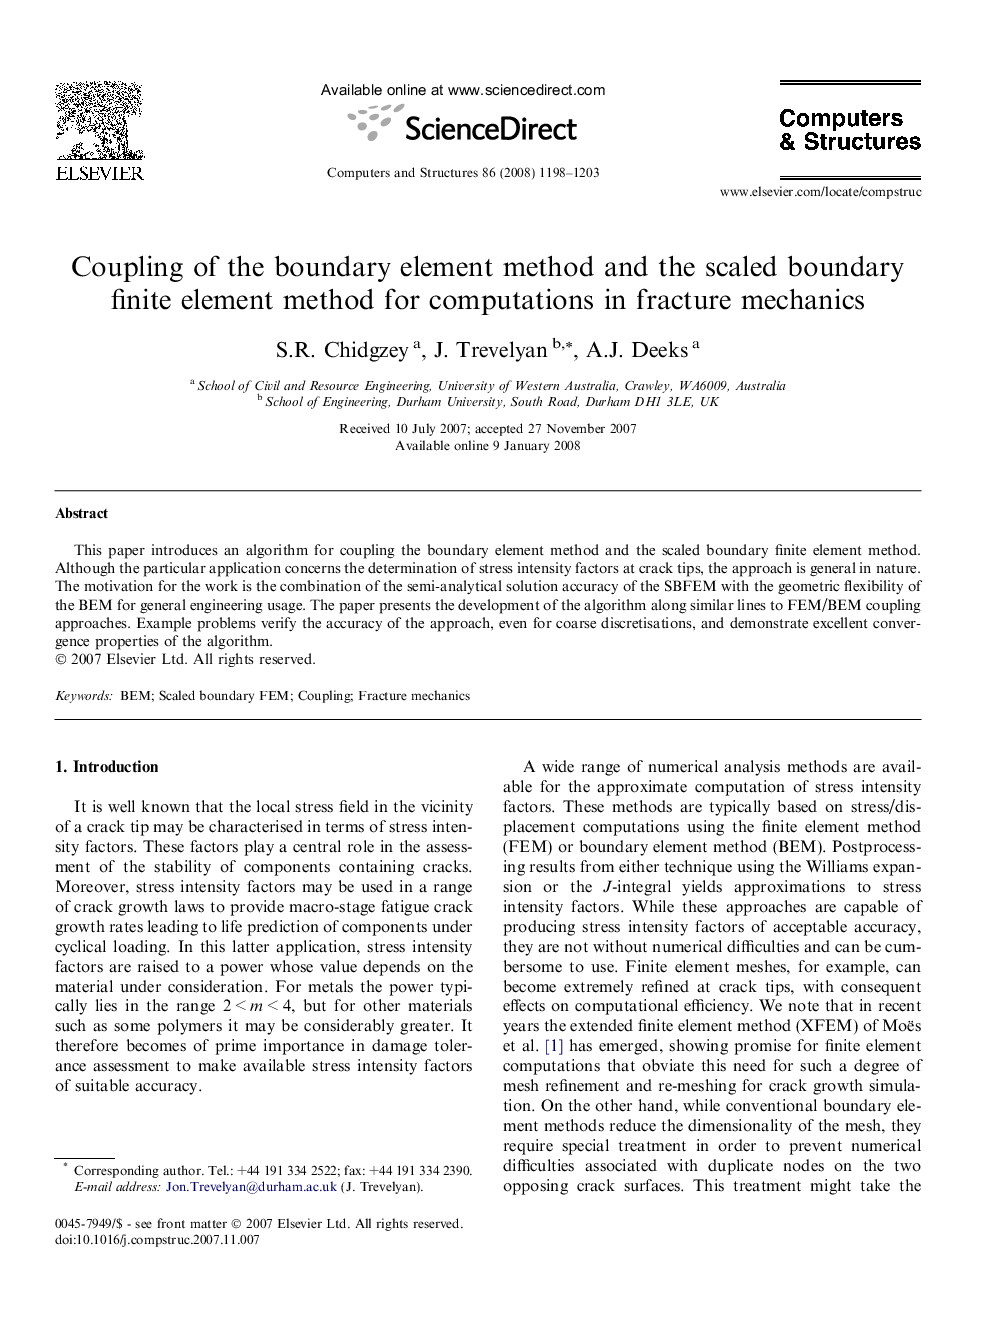 Coupling of the boundary element method and the scaled boundary finite element method for computations in fracture mechanics